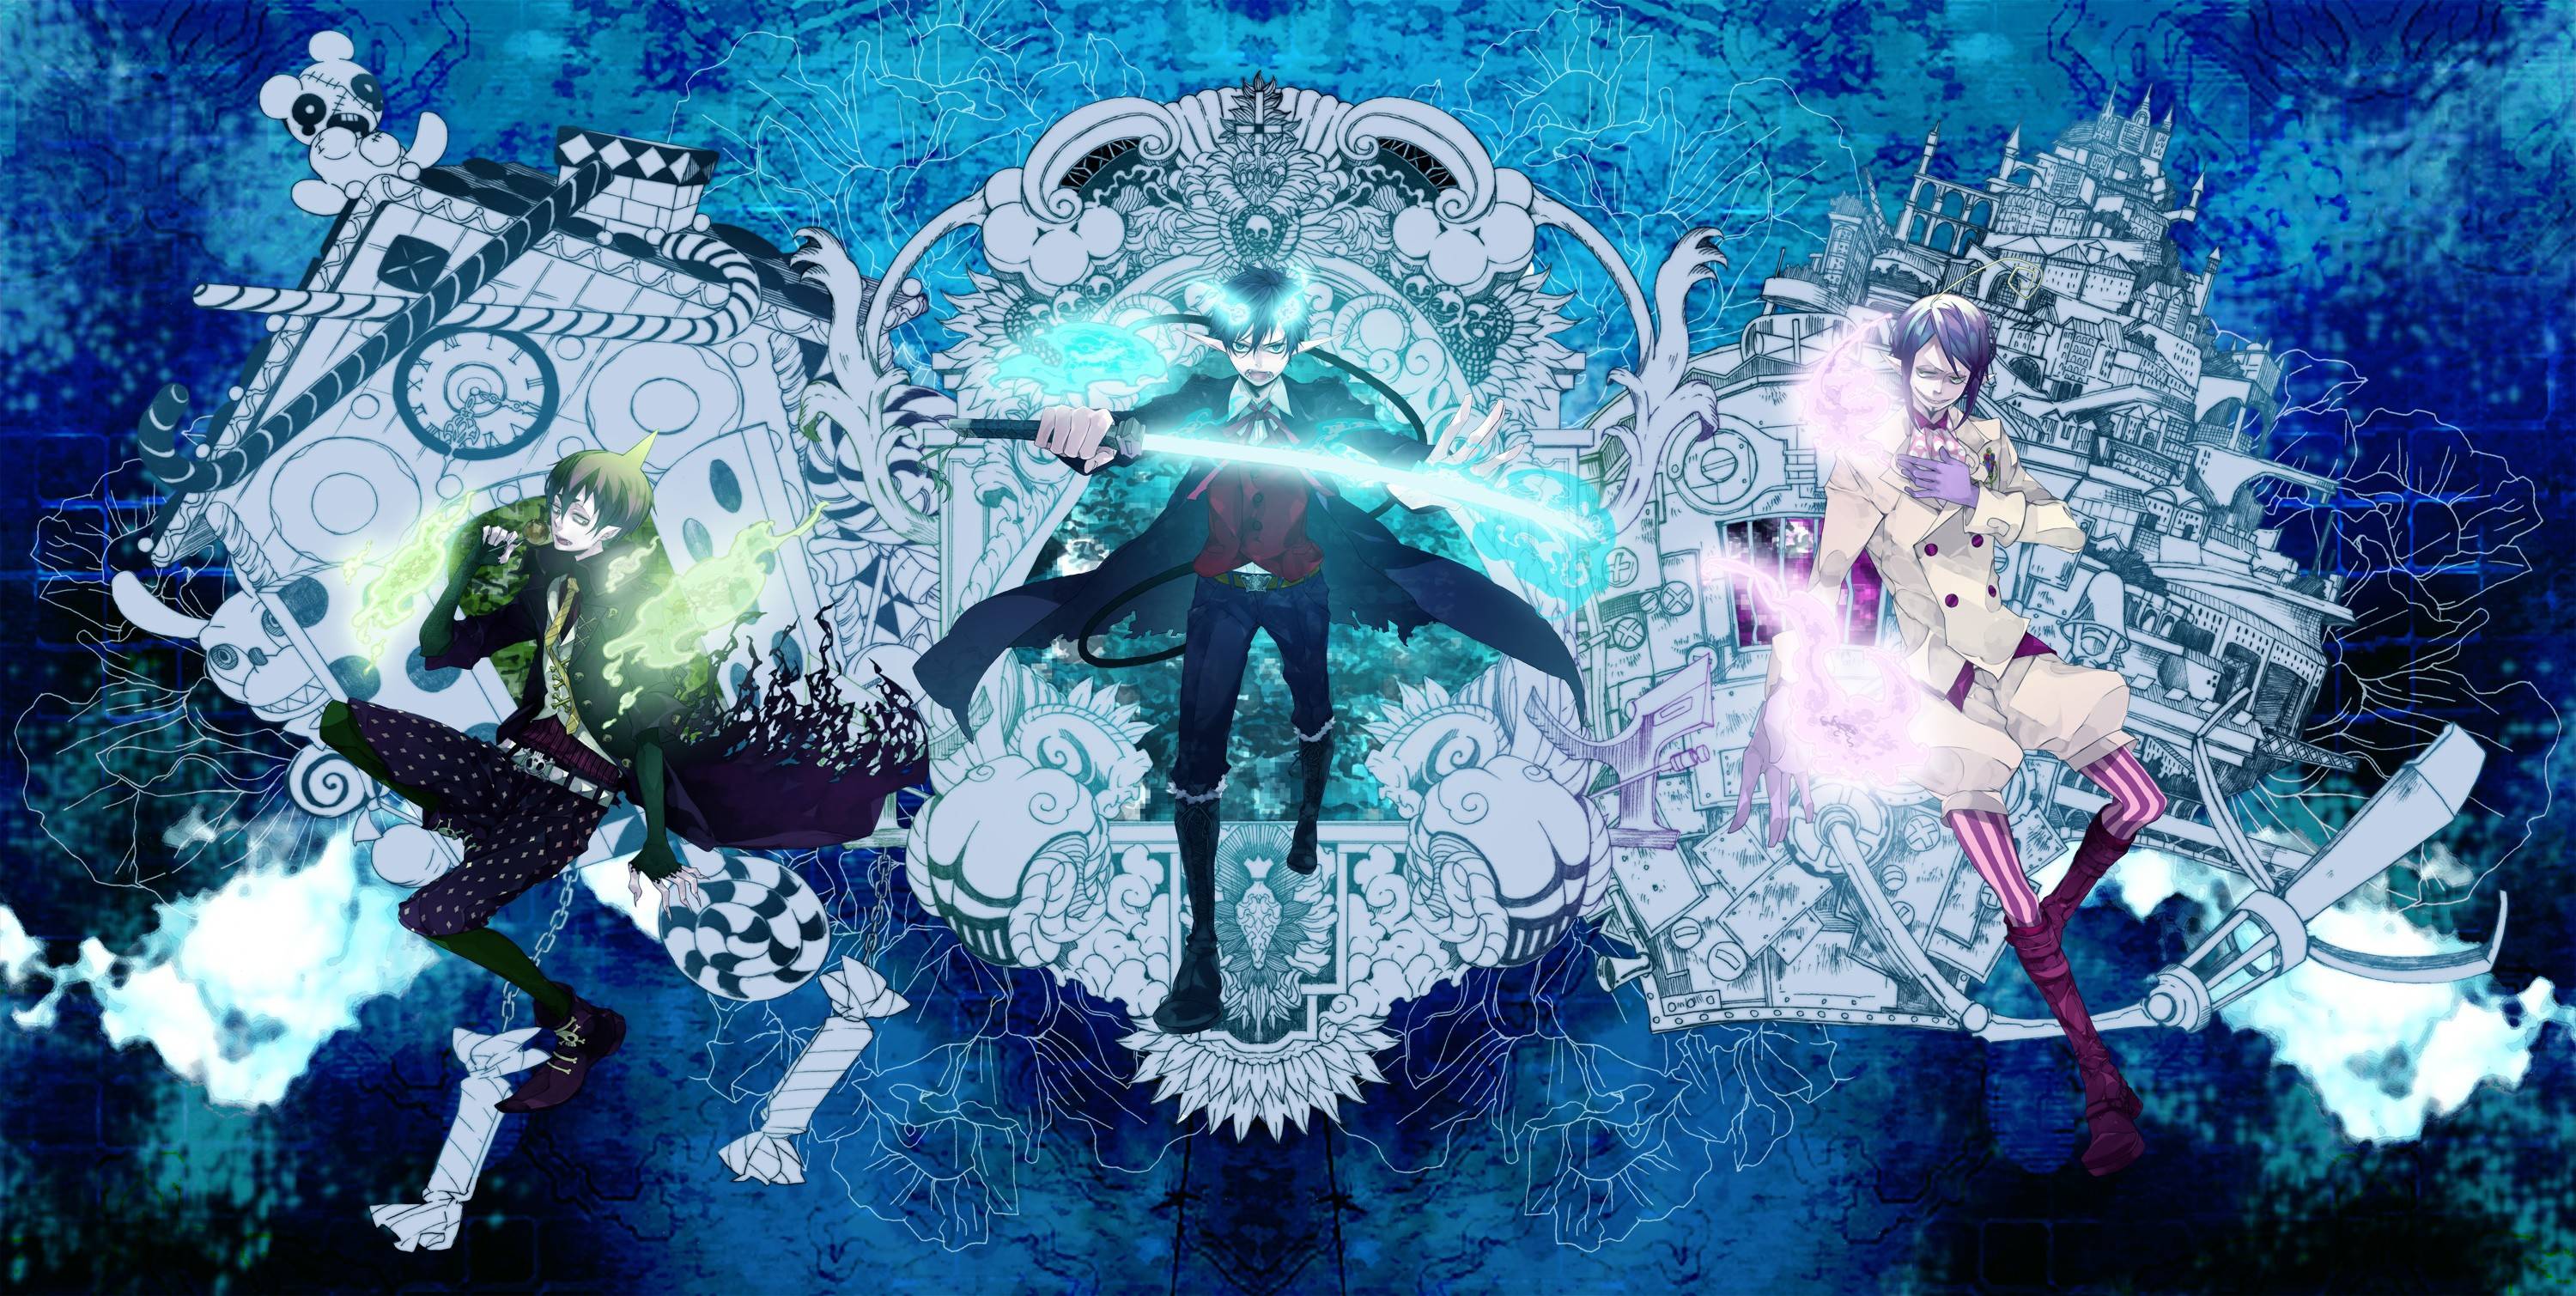 Blue Exorcist Wallpapers - Wallpaper Cave